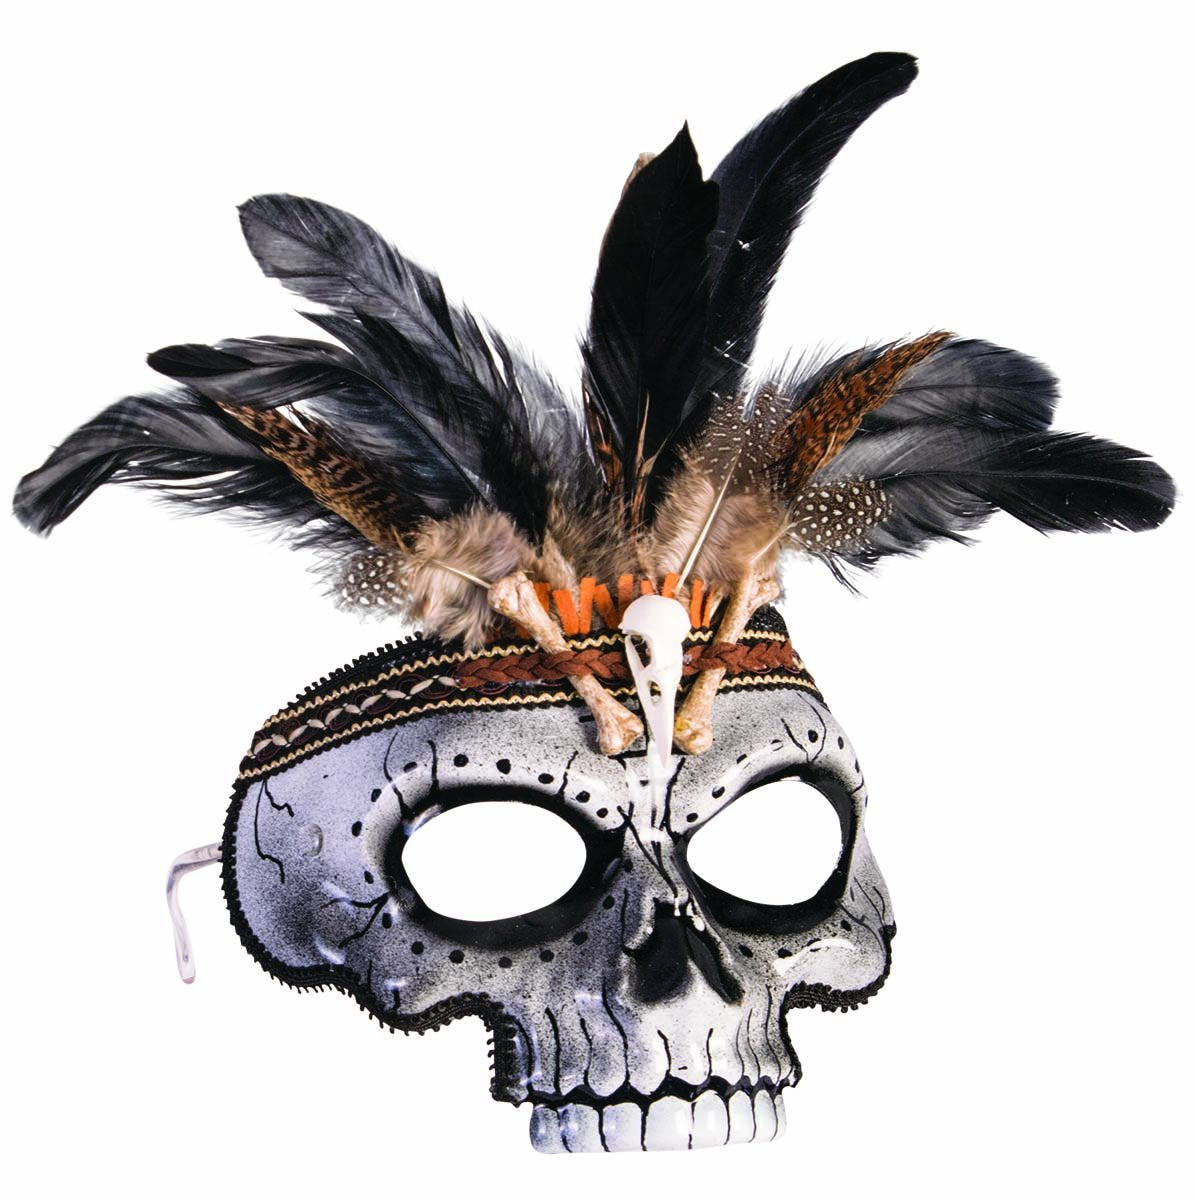 Voodoo skull with bones and feathers